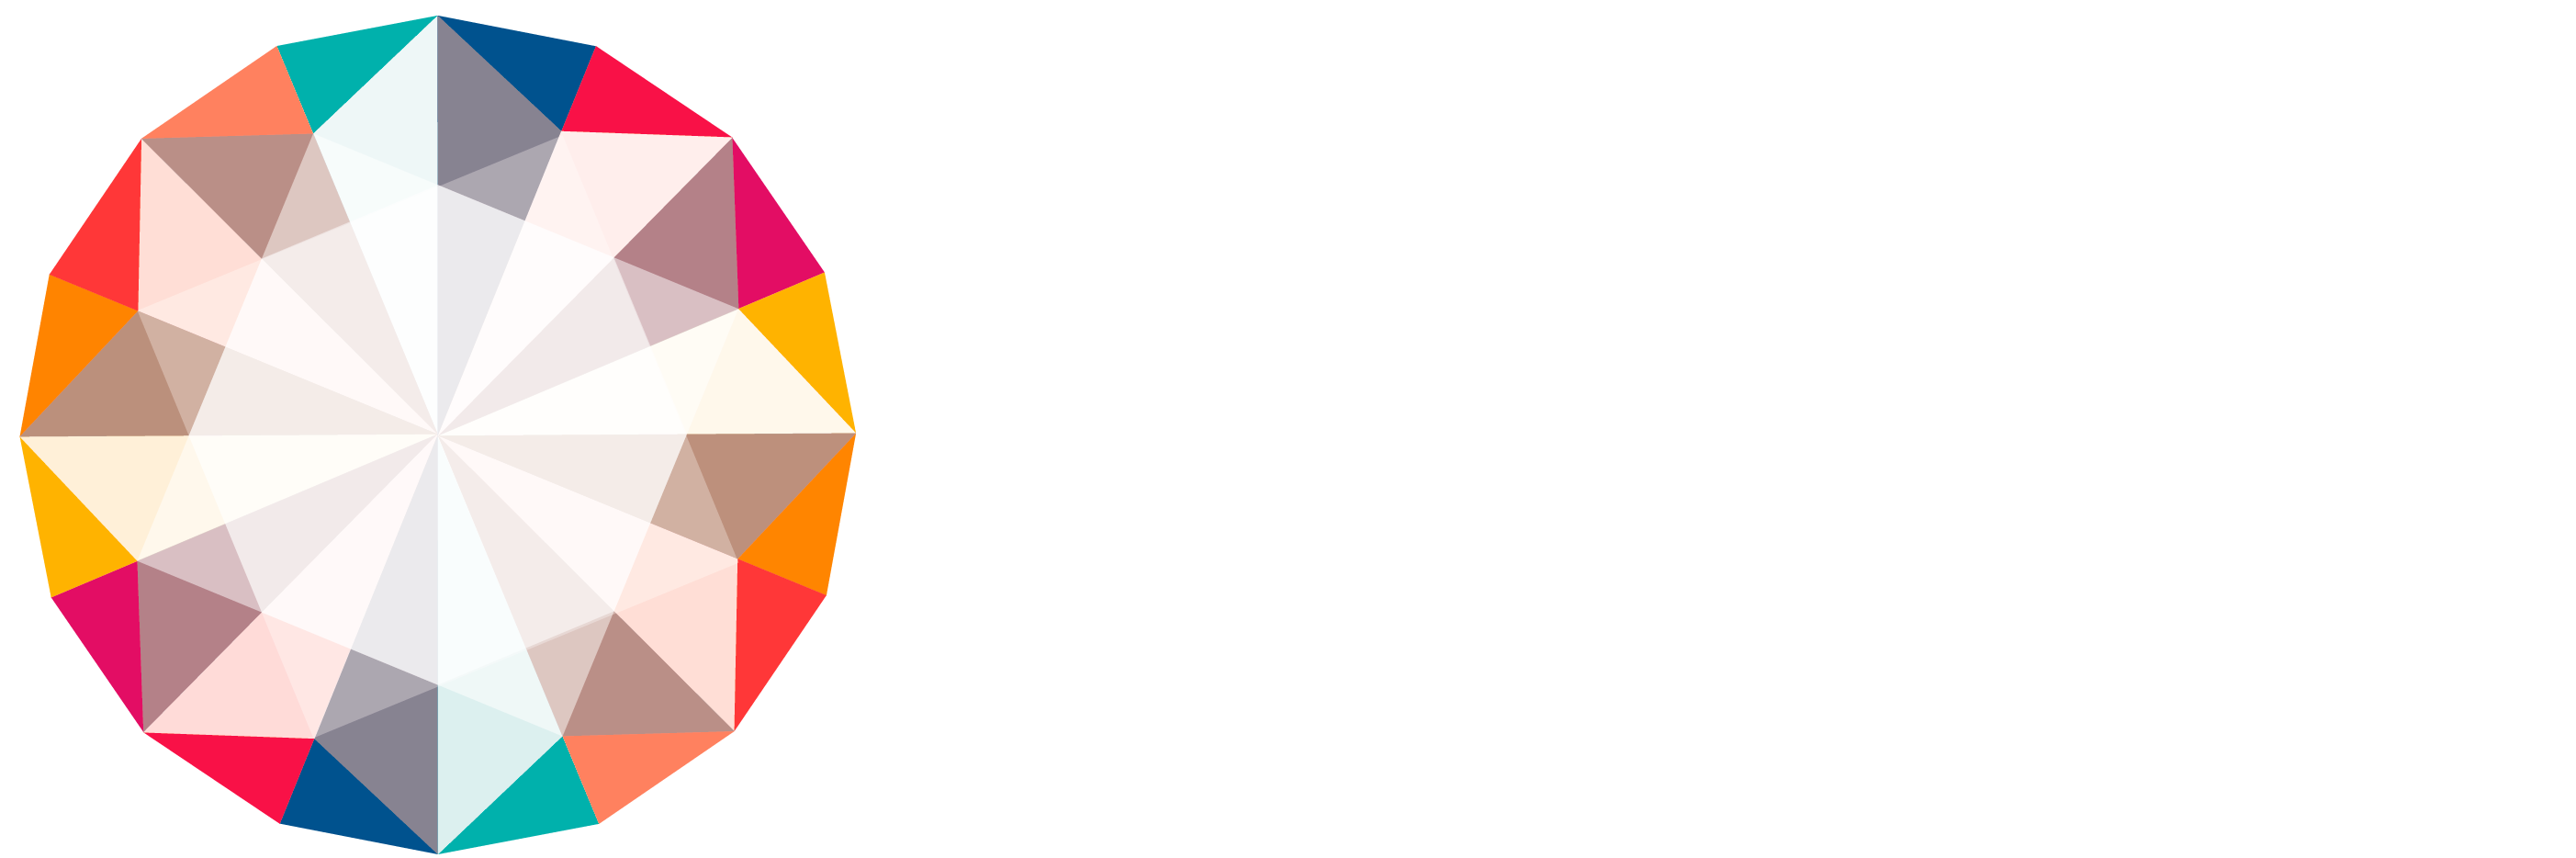 LEAD THE TALENT<br />
